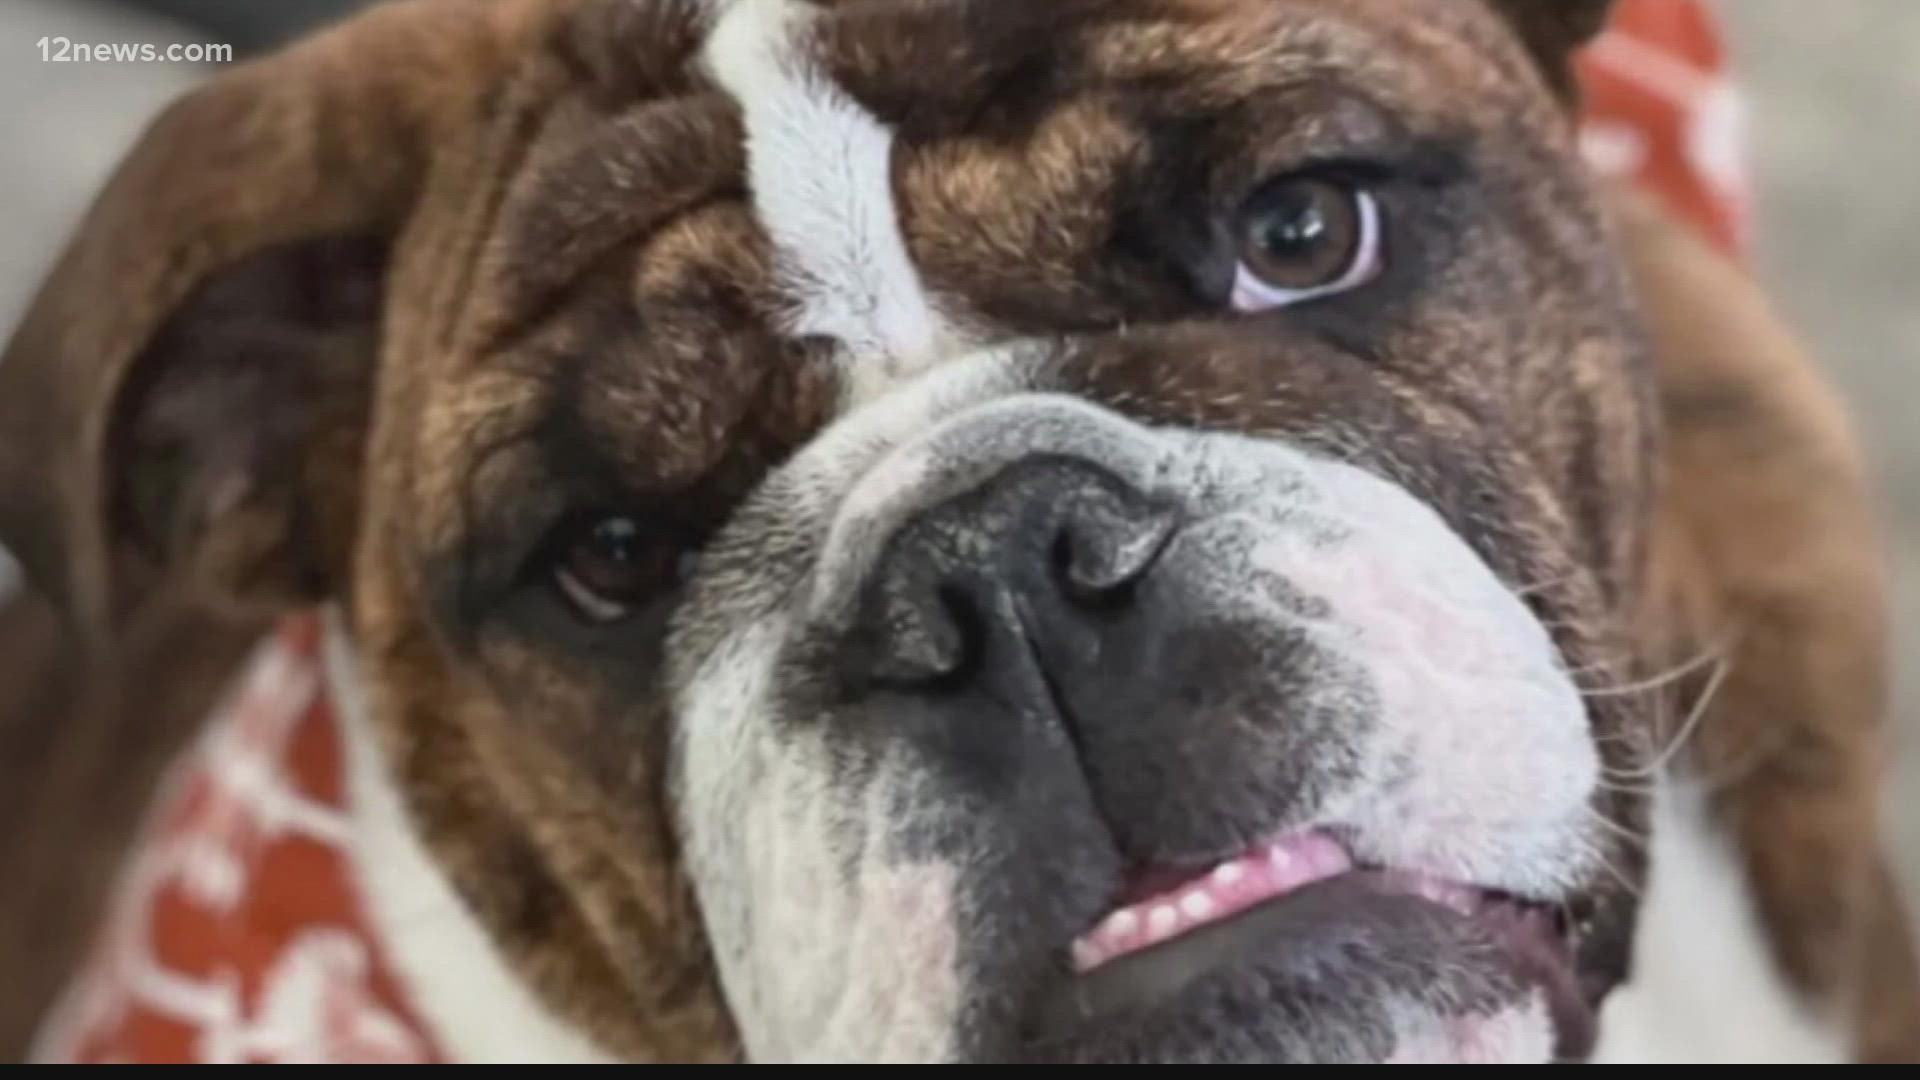 Nathan the English Bulldog has been since Sunday night and the Barretts believe someone may have taken him.